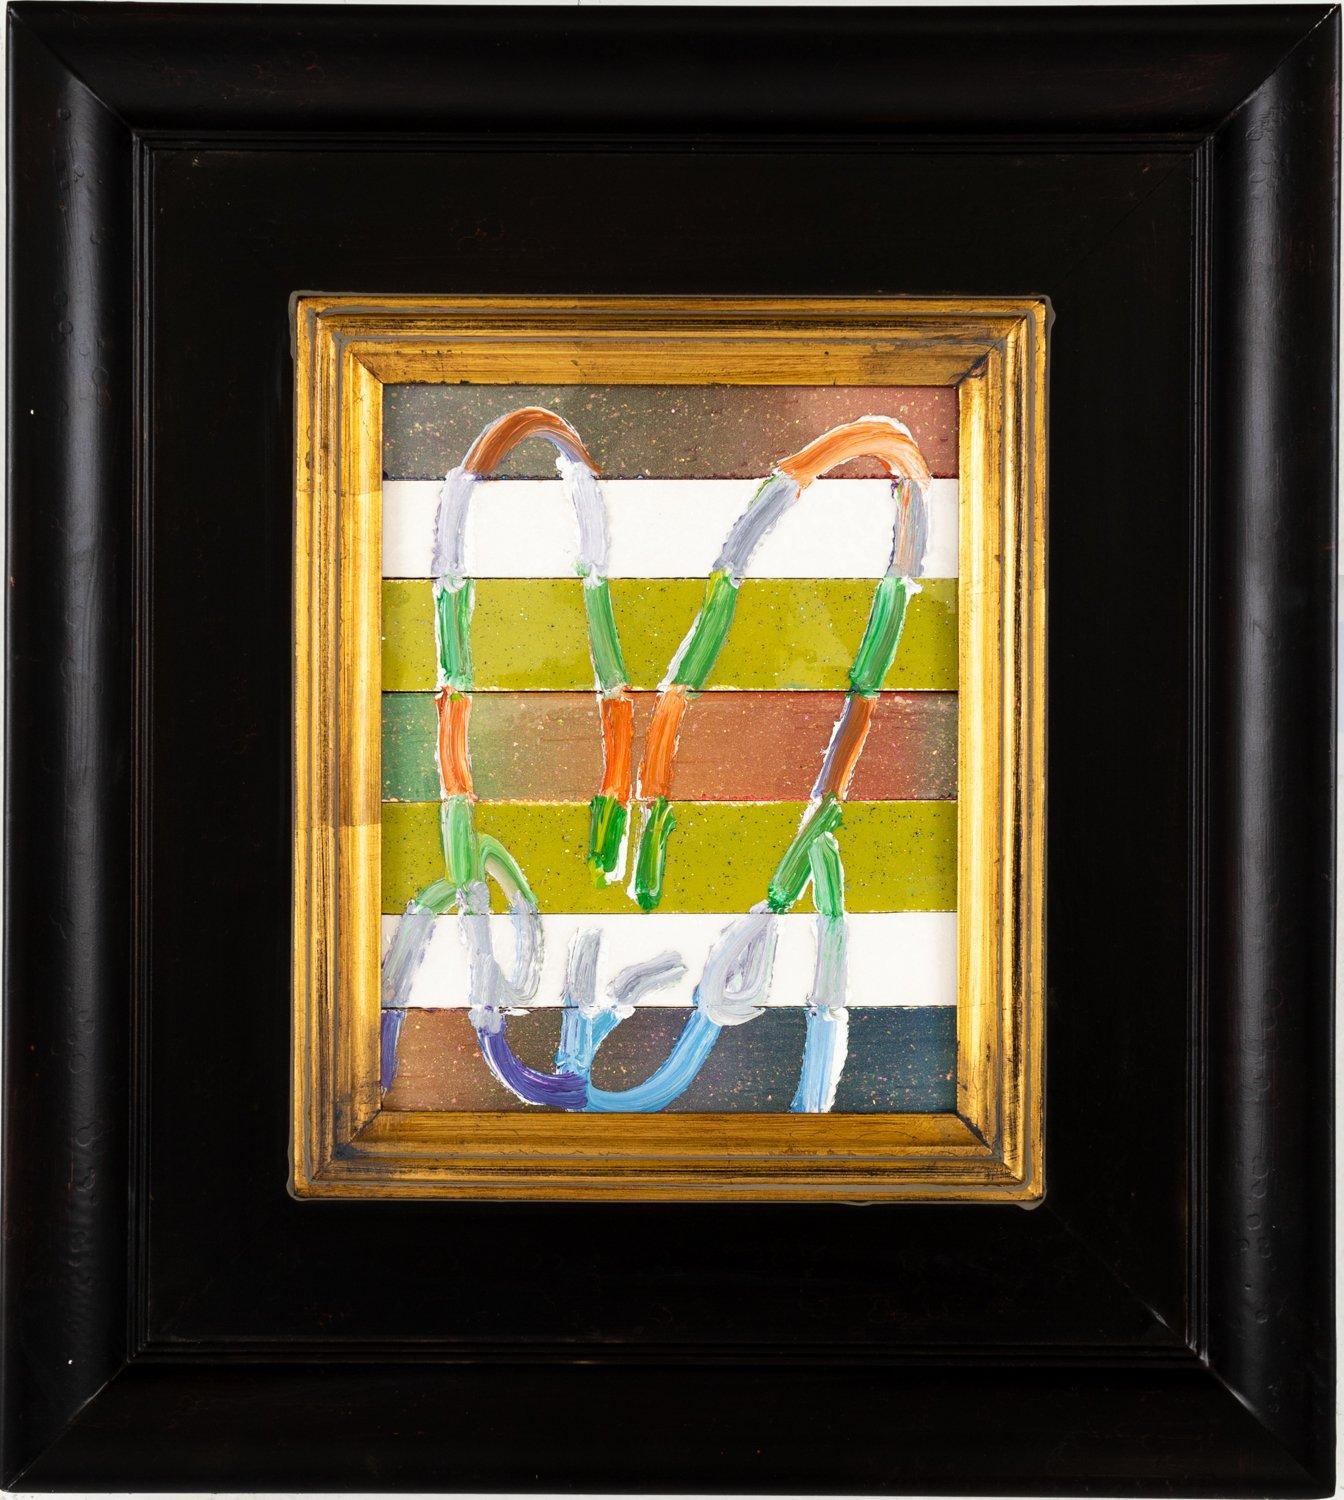 Renowned artist Hunt Slonem's "Banded" is a 10x8 oil painting on wood board of a single contemporary abstract rabbit in black against a multi-colored background.

*Painting is framed - Please note that not all Hunt Slonem frames are in mint